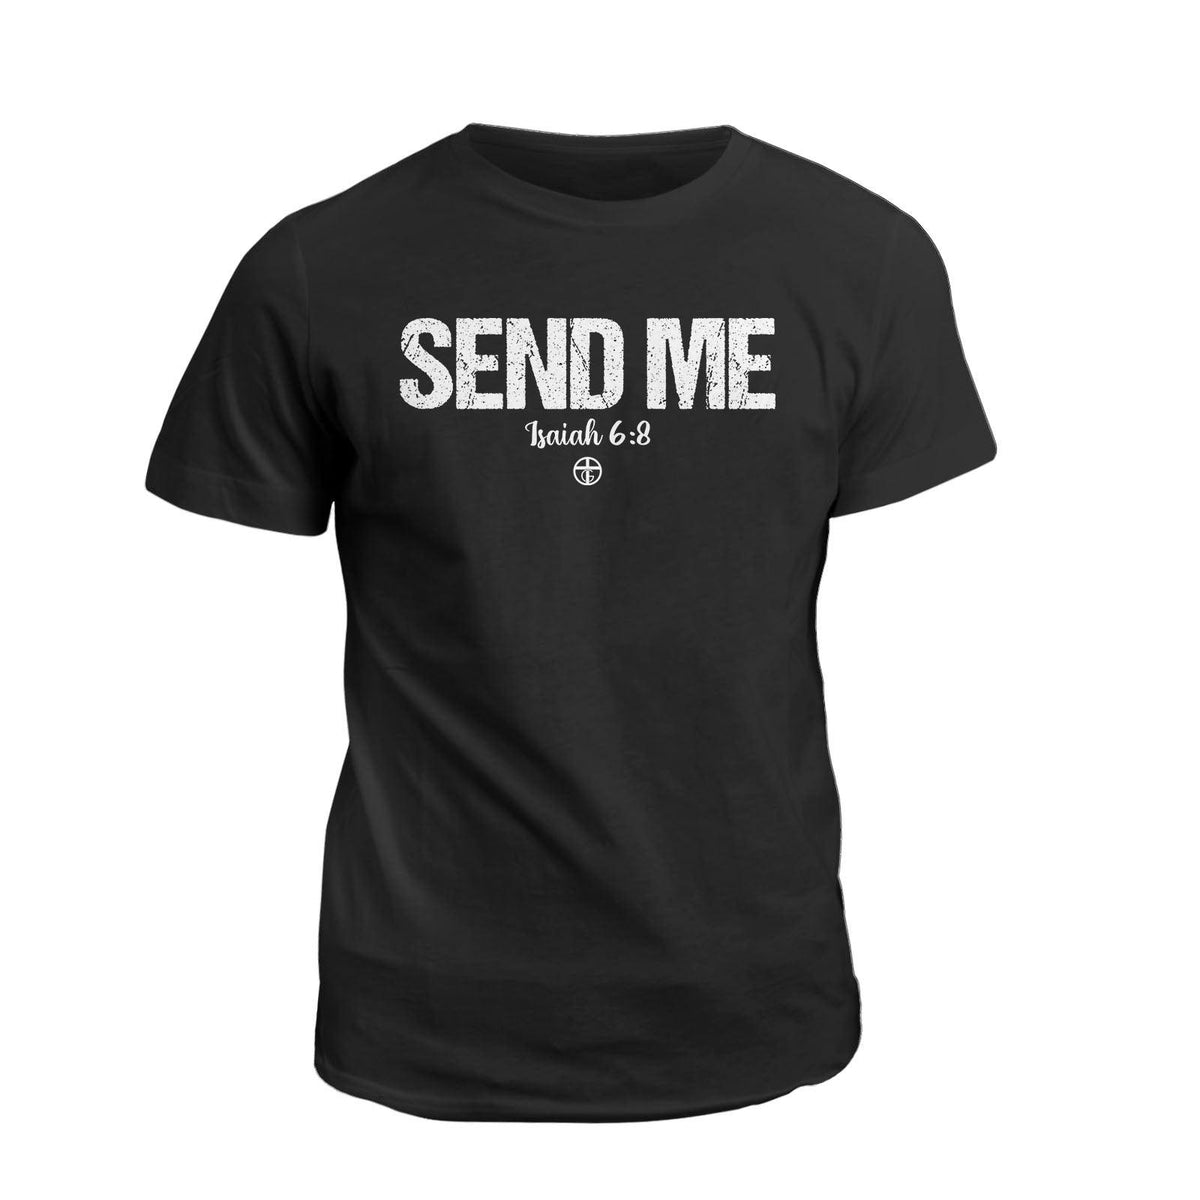 Isaiah 6:8 “SEND ME” (Front and Back Print) - Our True God